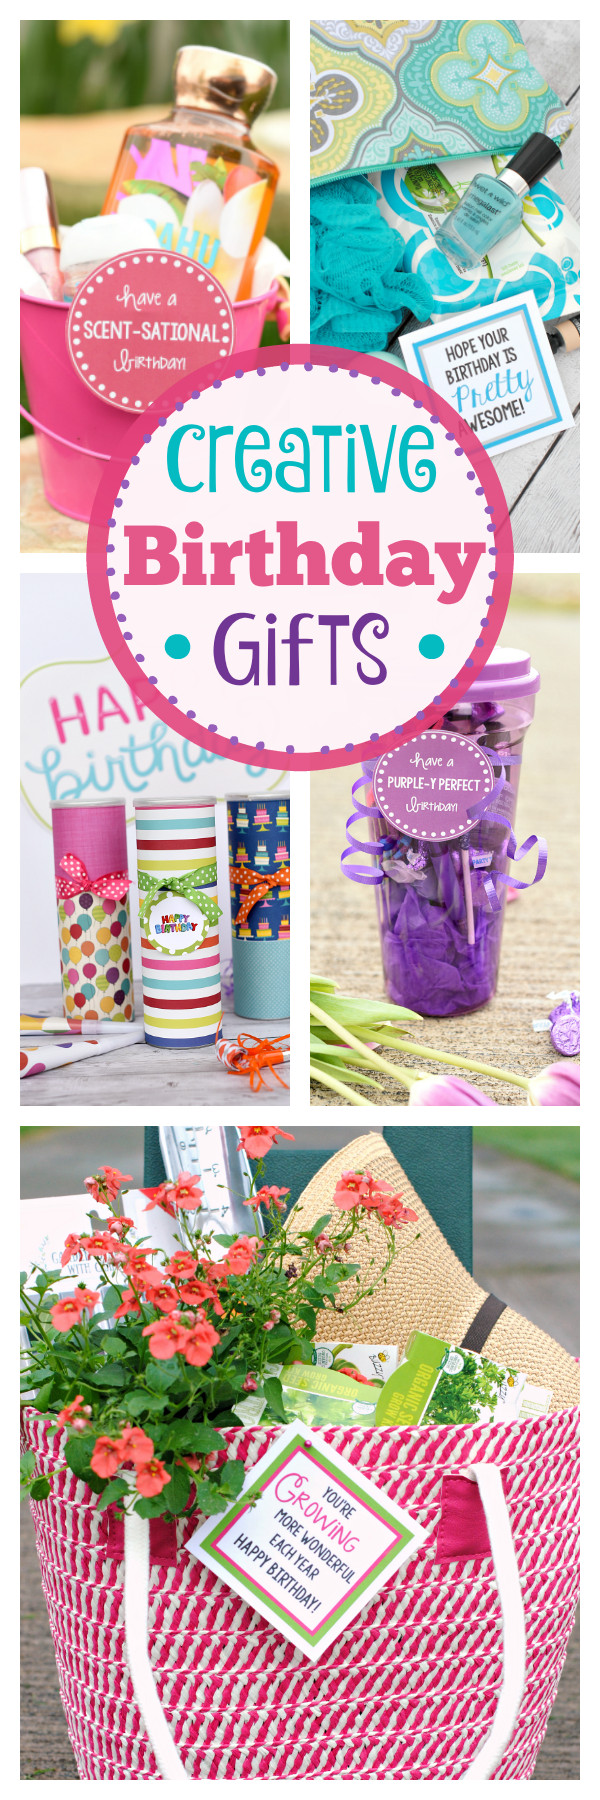 Good Birthday Gifts
 Creative Birthday Gifts for Friends – Fun Squared